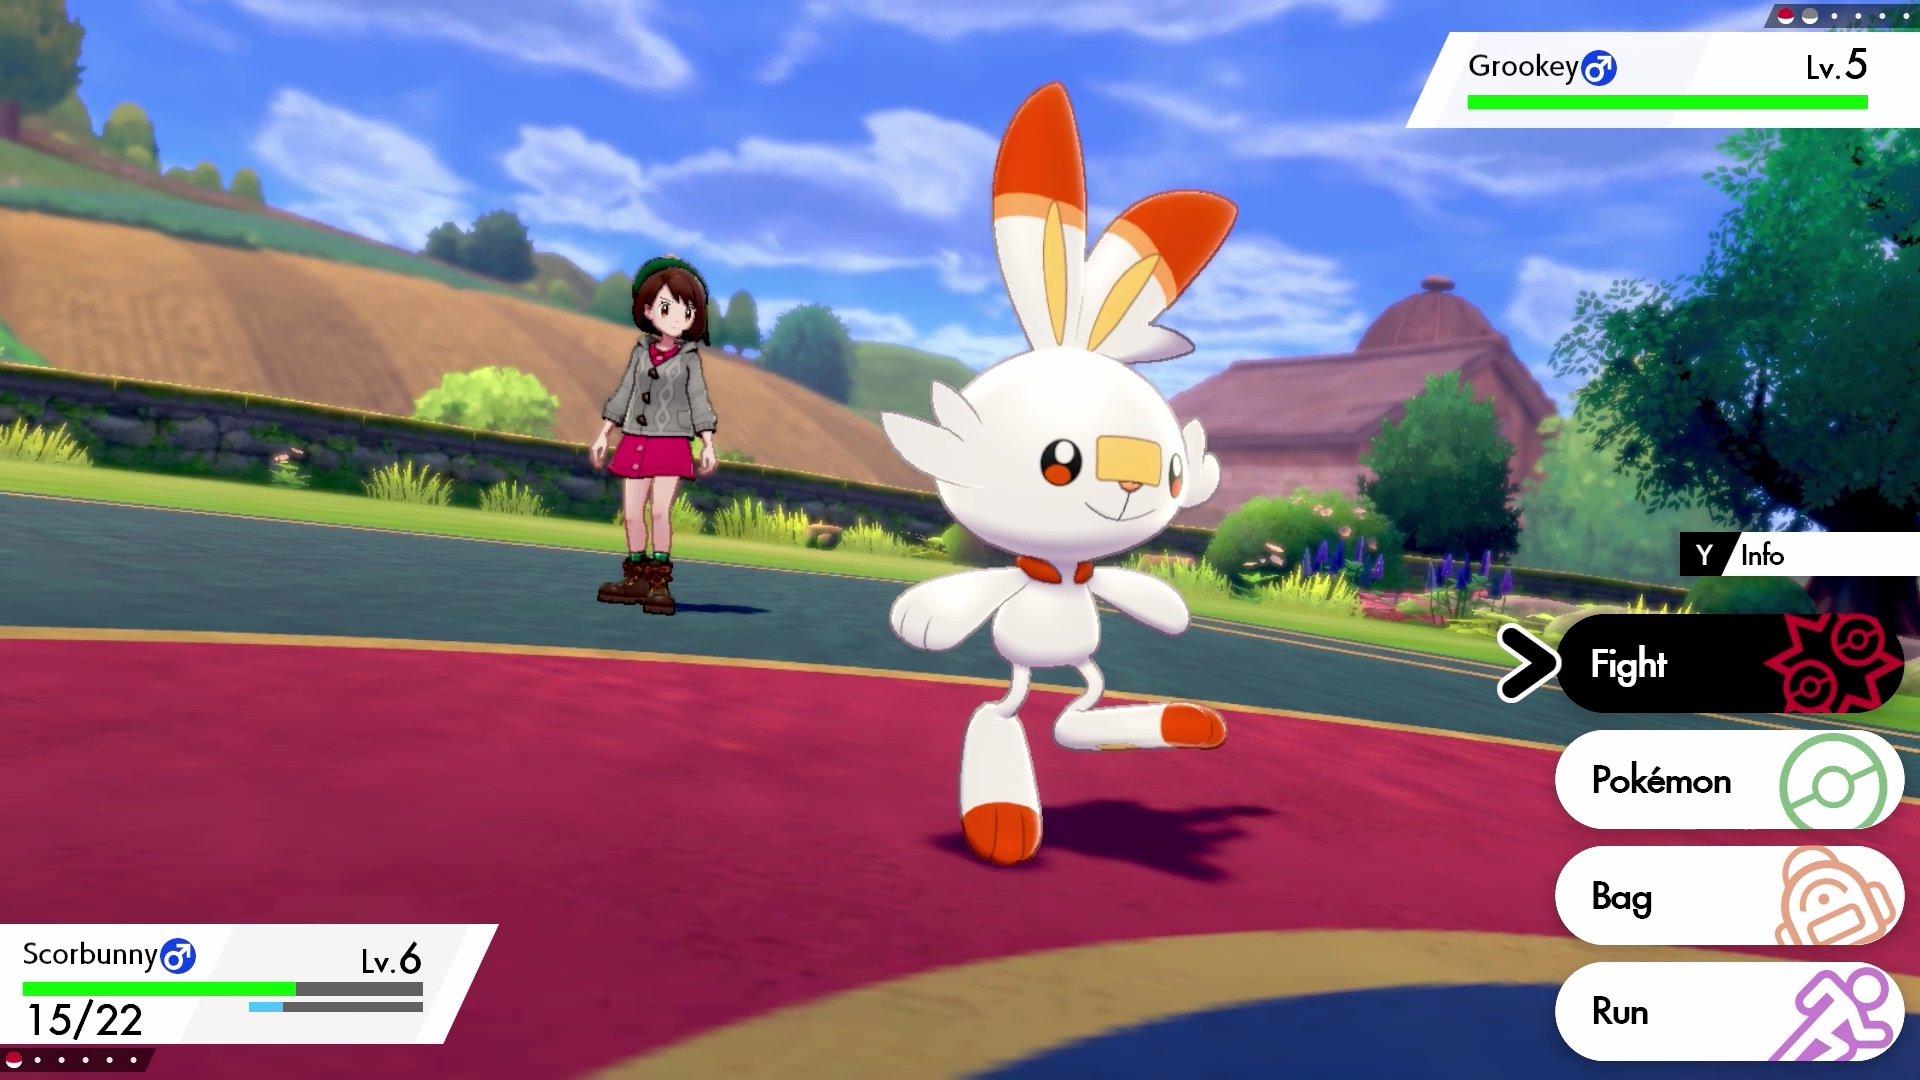 Pokémon Sword and Shield bundles with Expansion Pass hitting shelves on  November 6th. - Vooks